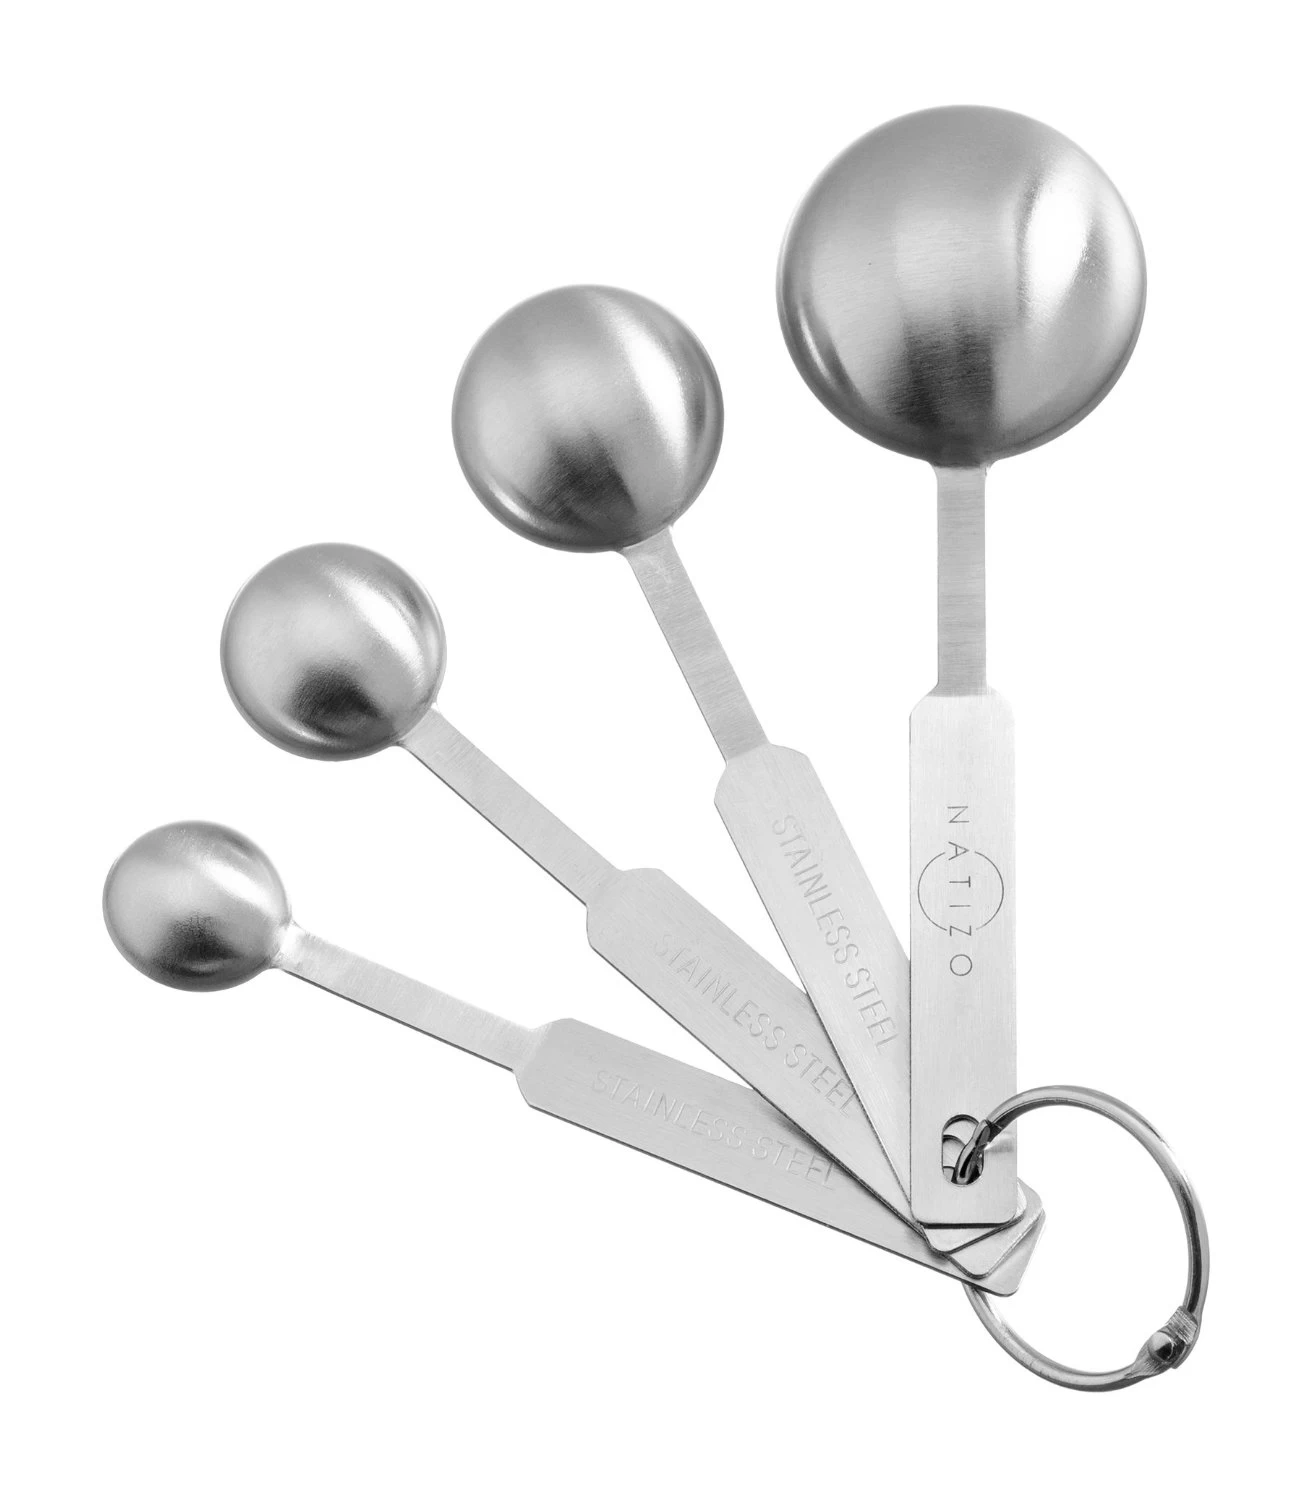 Stainless Steel Mearsuring Spoon china, Stainless Steel Mearsuring Spoon supplier